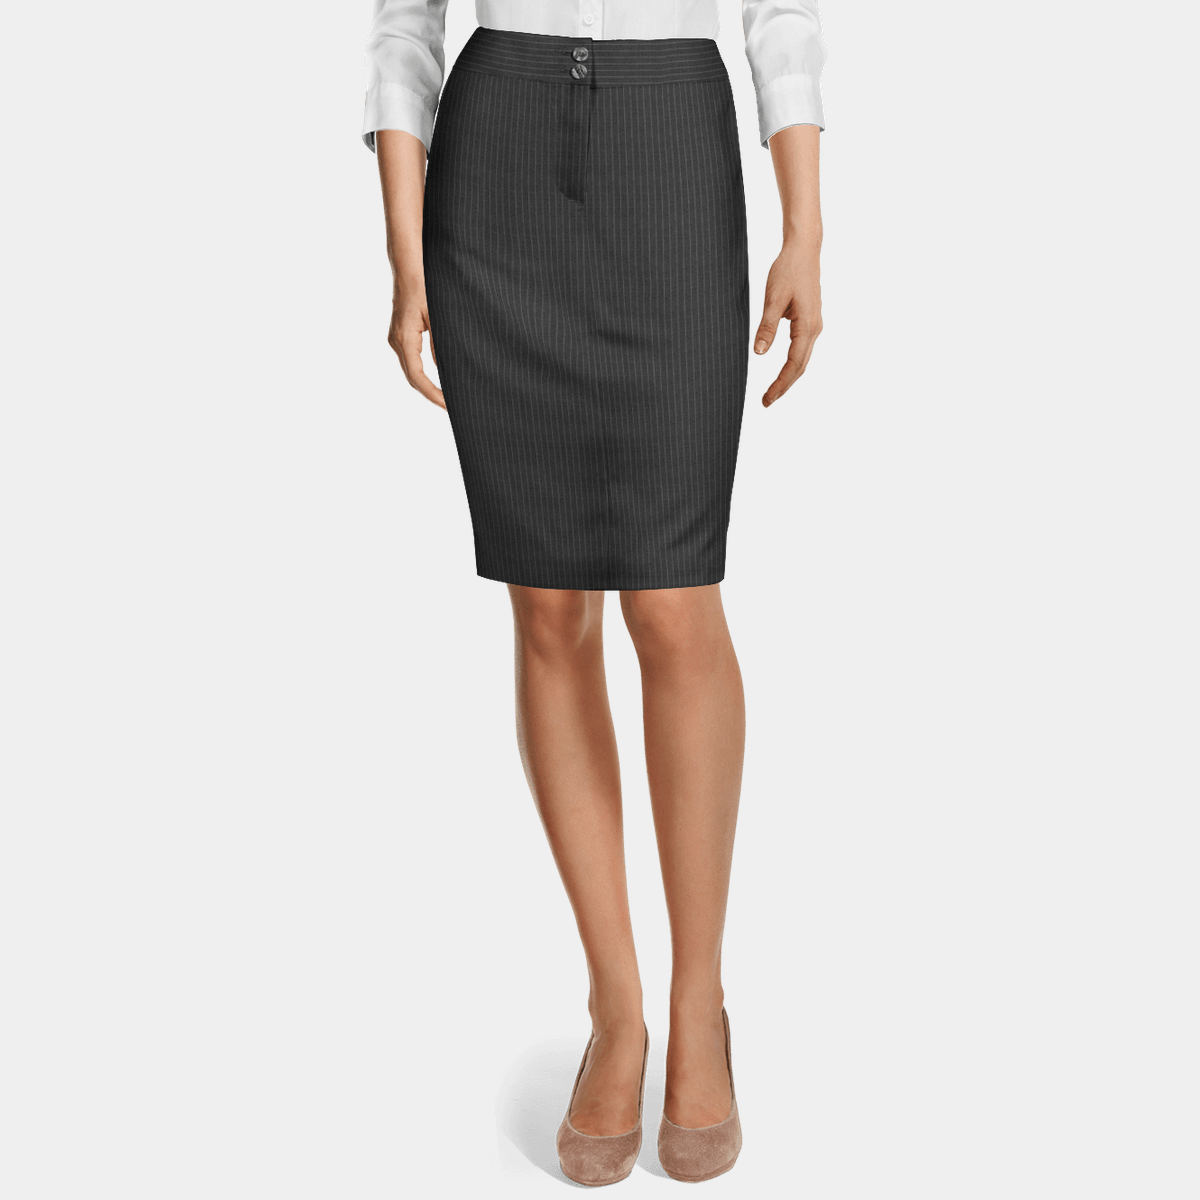 George Women's Pencil Skirt Charcoal Grey Heather fully lined nice 